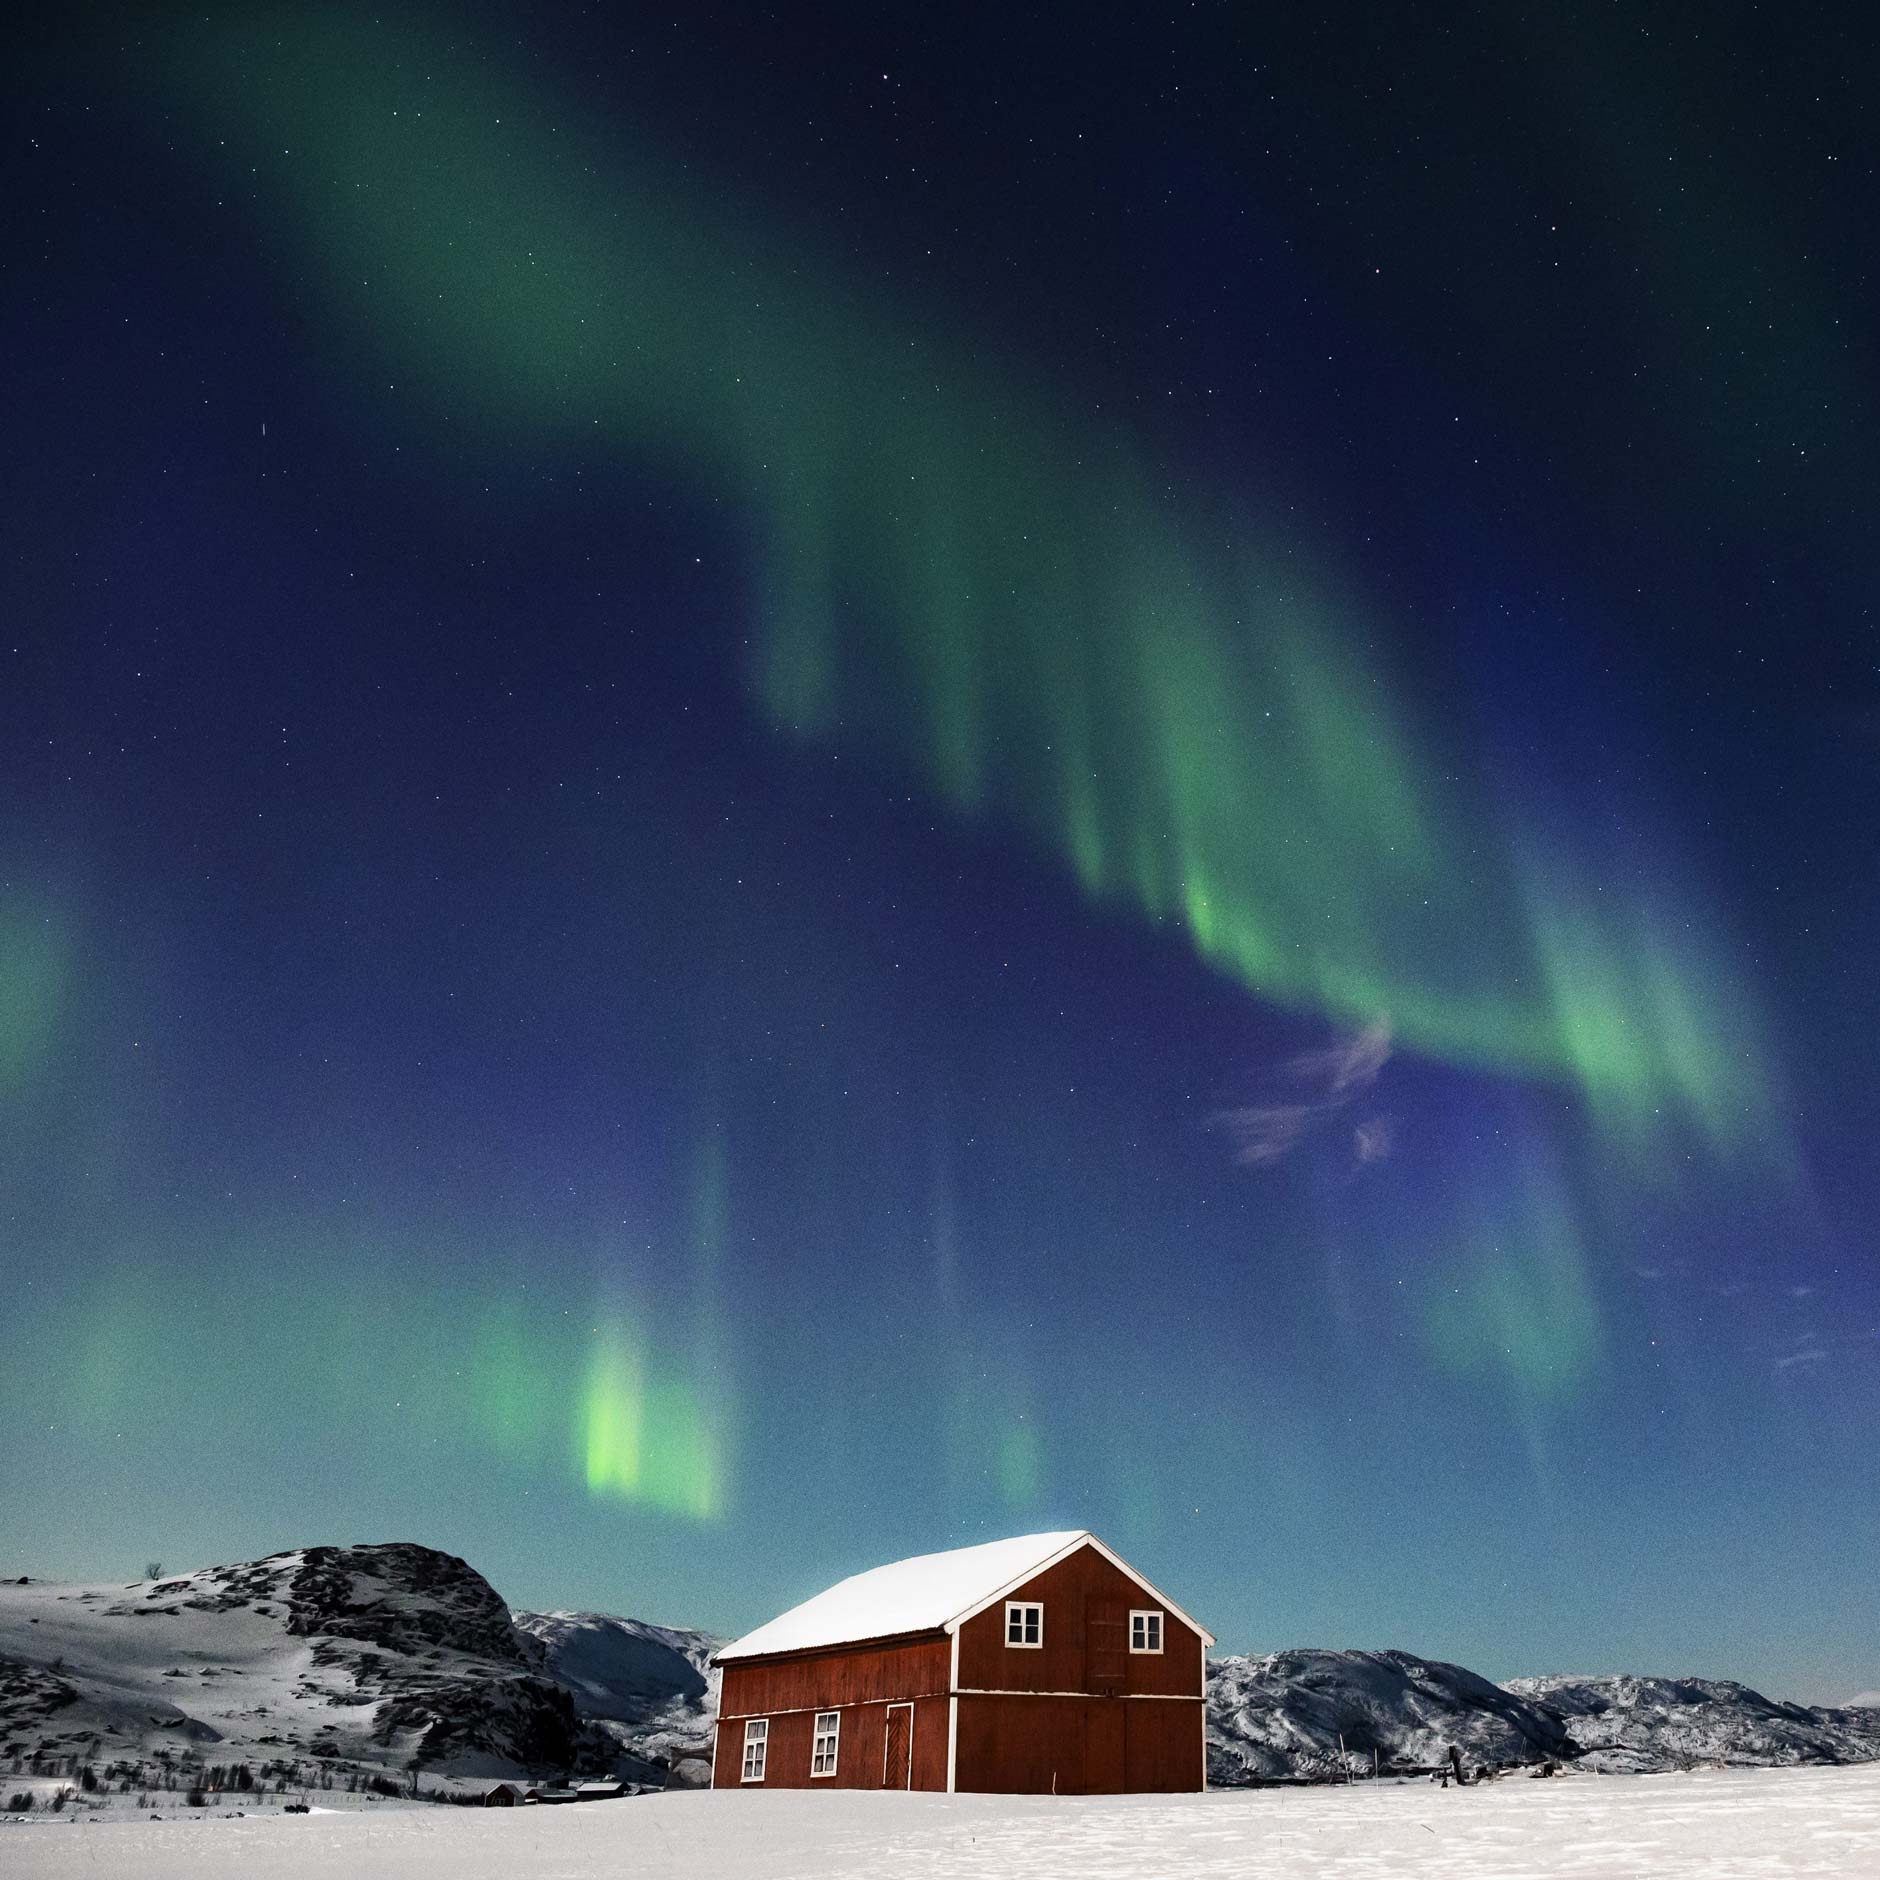 The aurora borealis over a red cabin in the snow in Norway at night